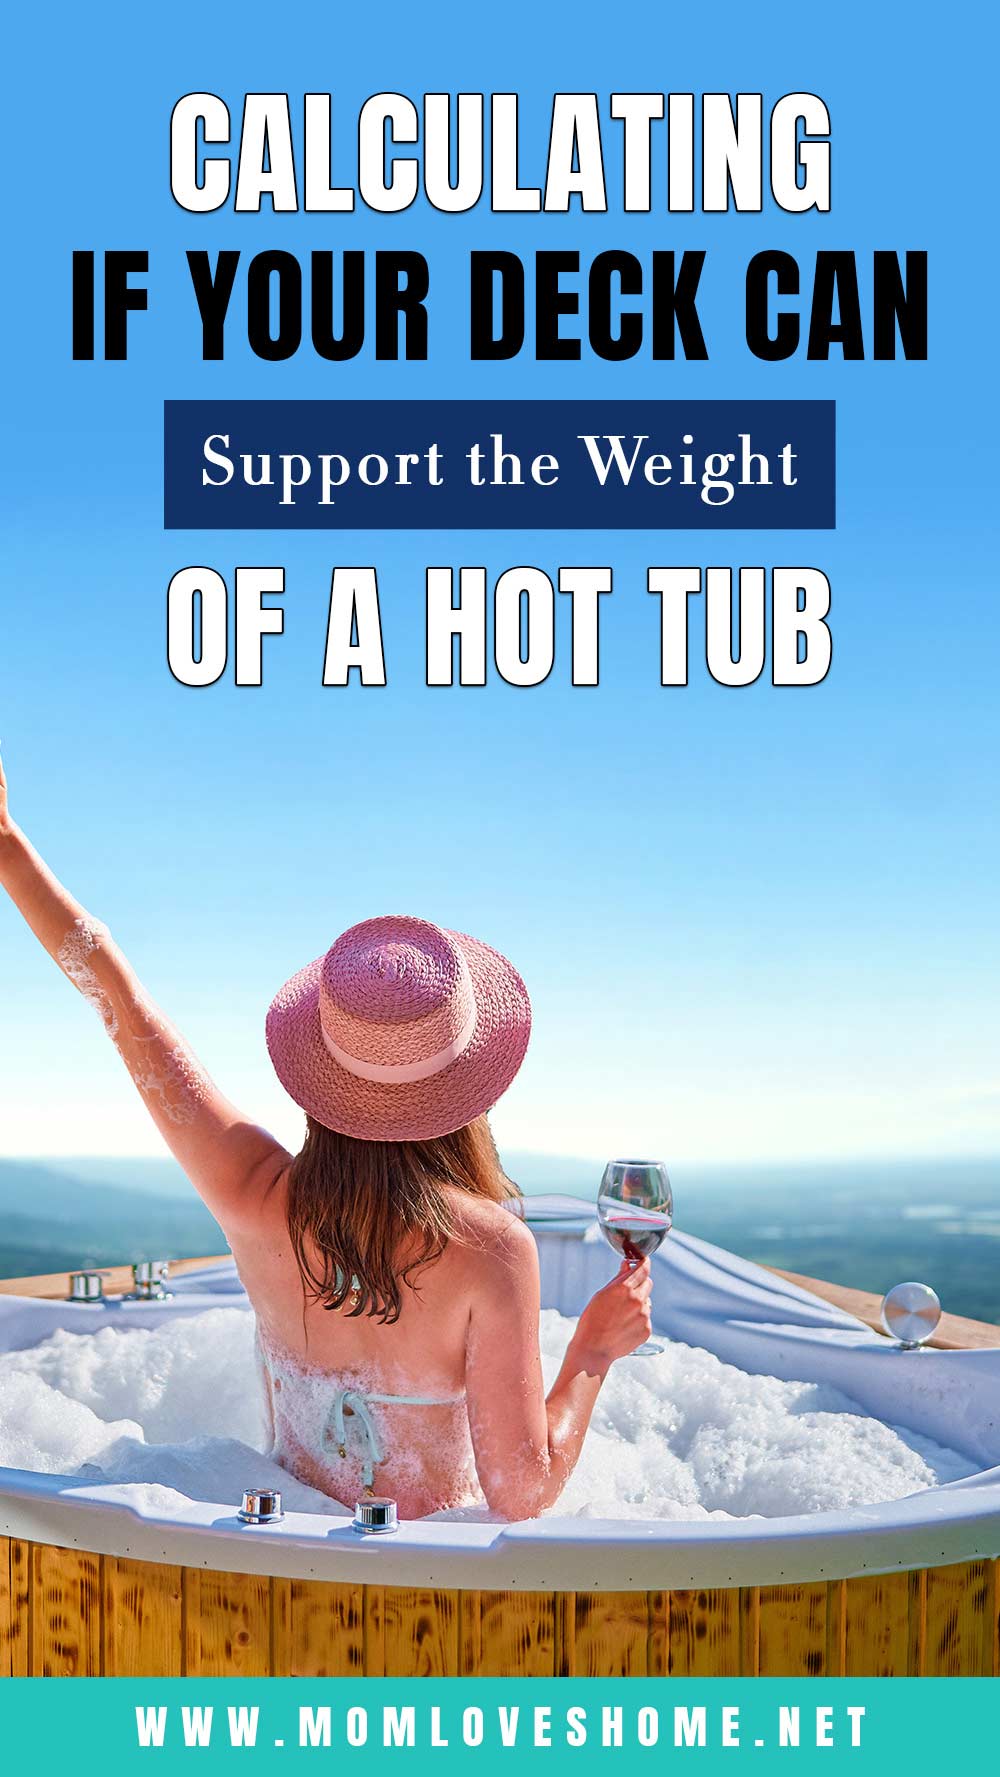 Calculating if Your Deck Can Support the Weight of a Hot Tub